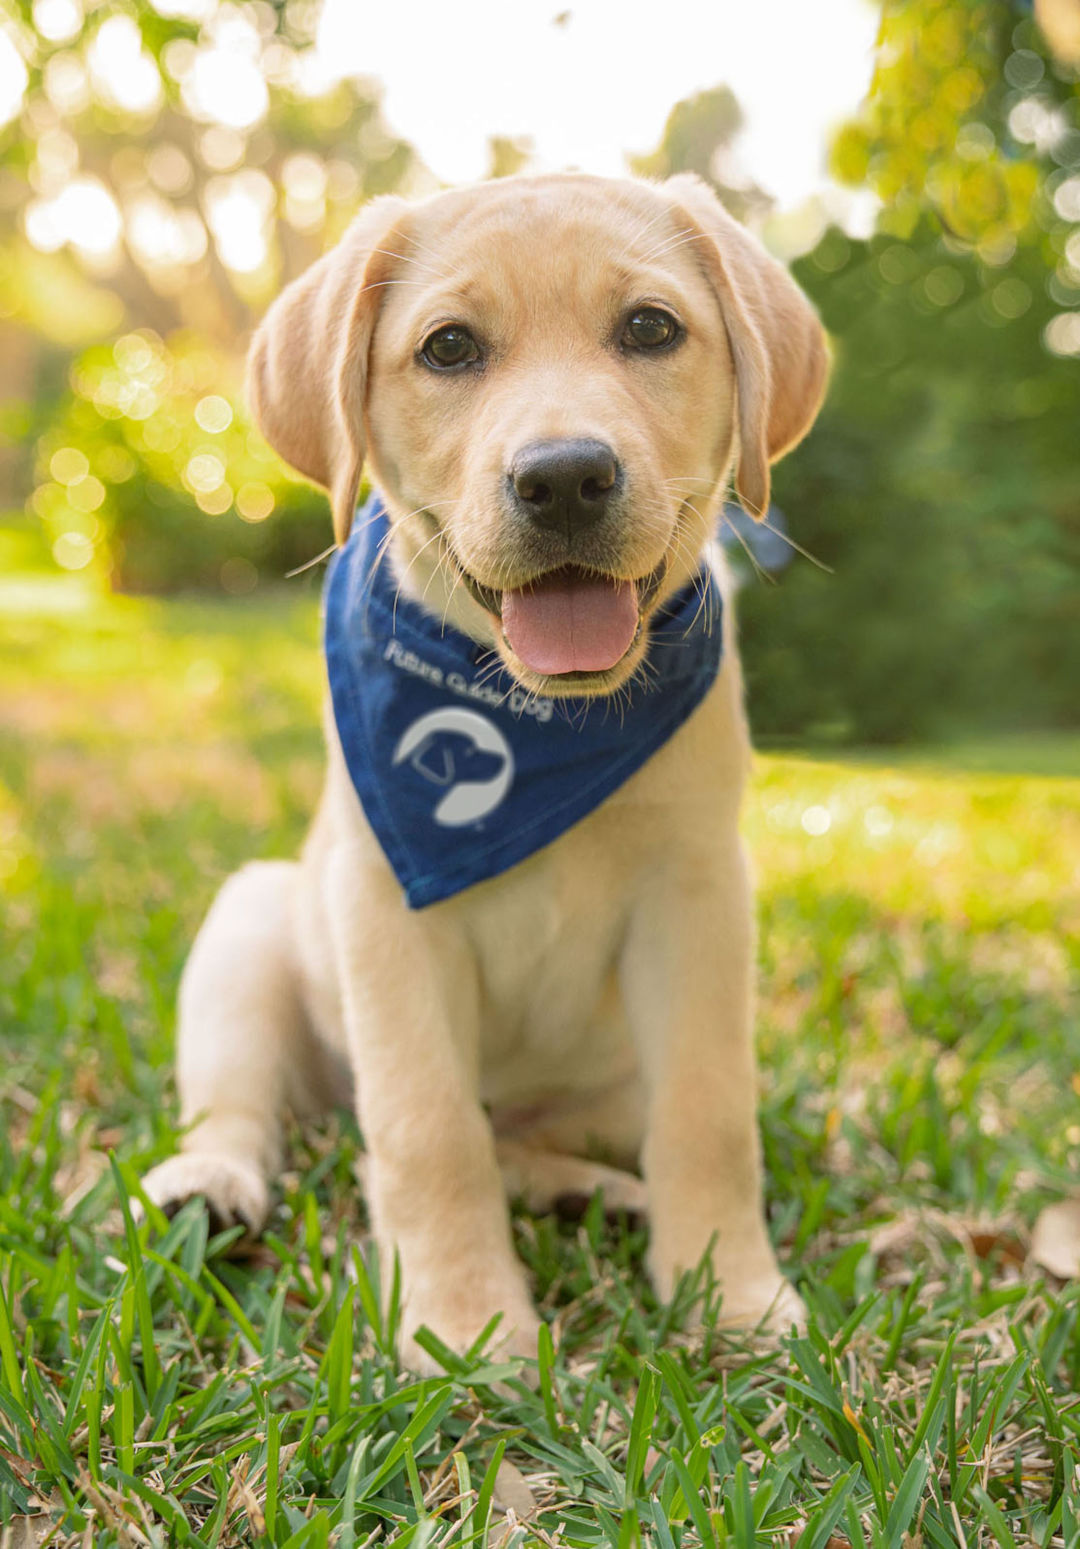 A puppy in training at Southeastern Guide Dogs.